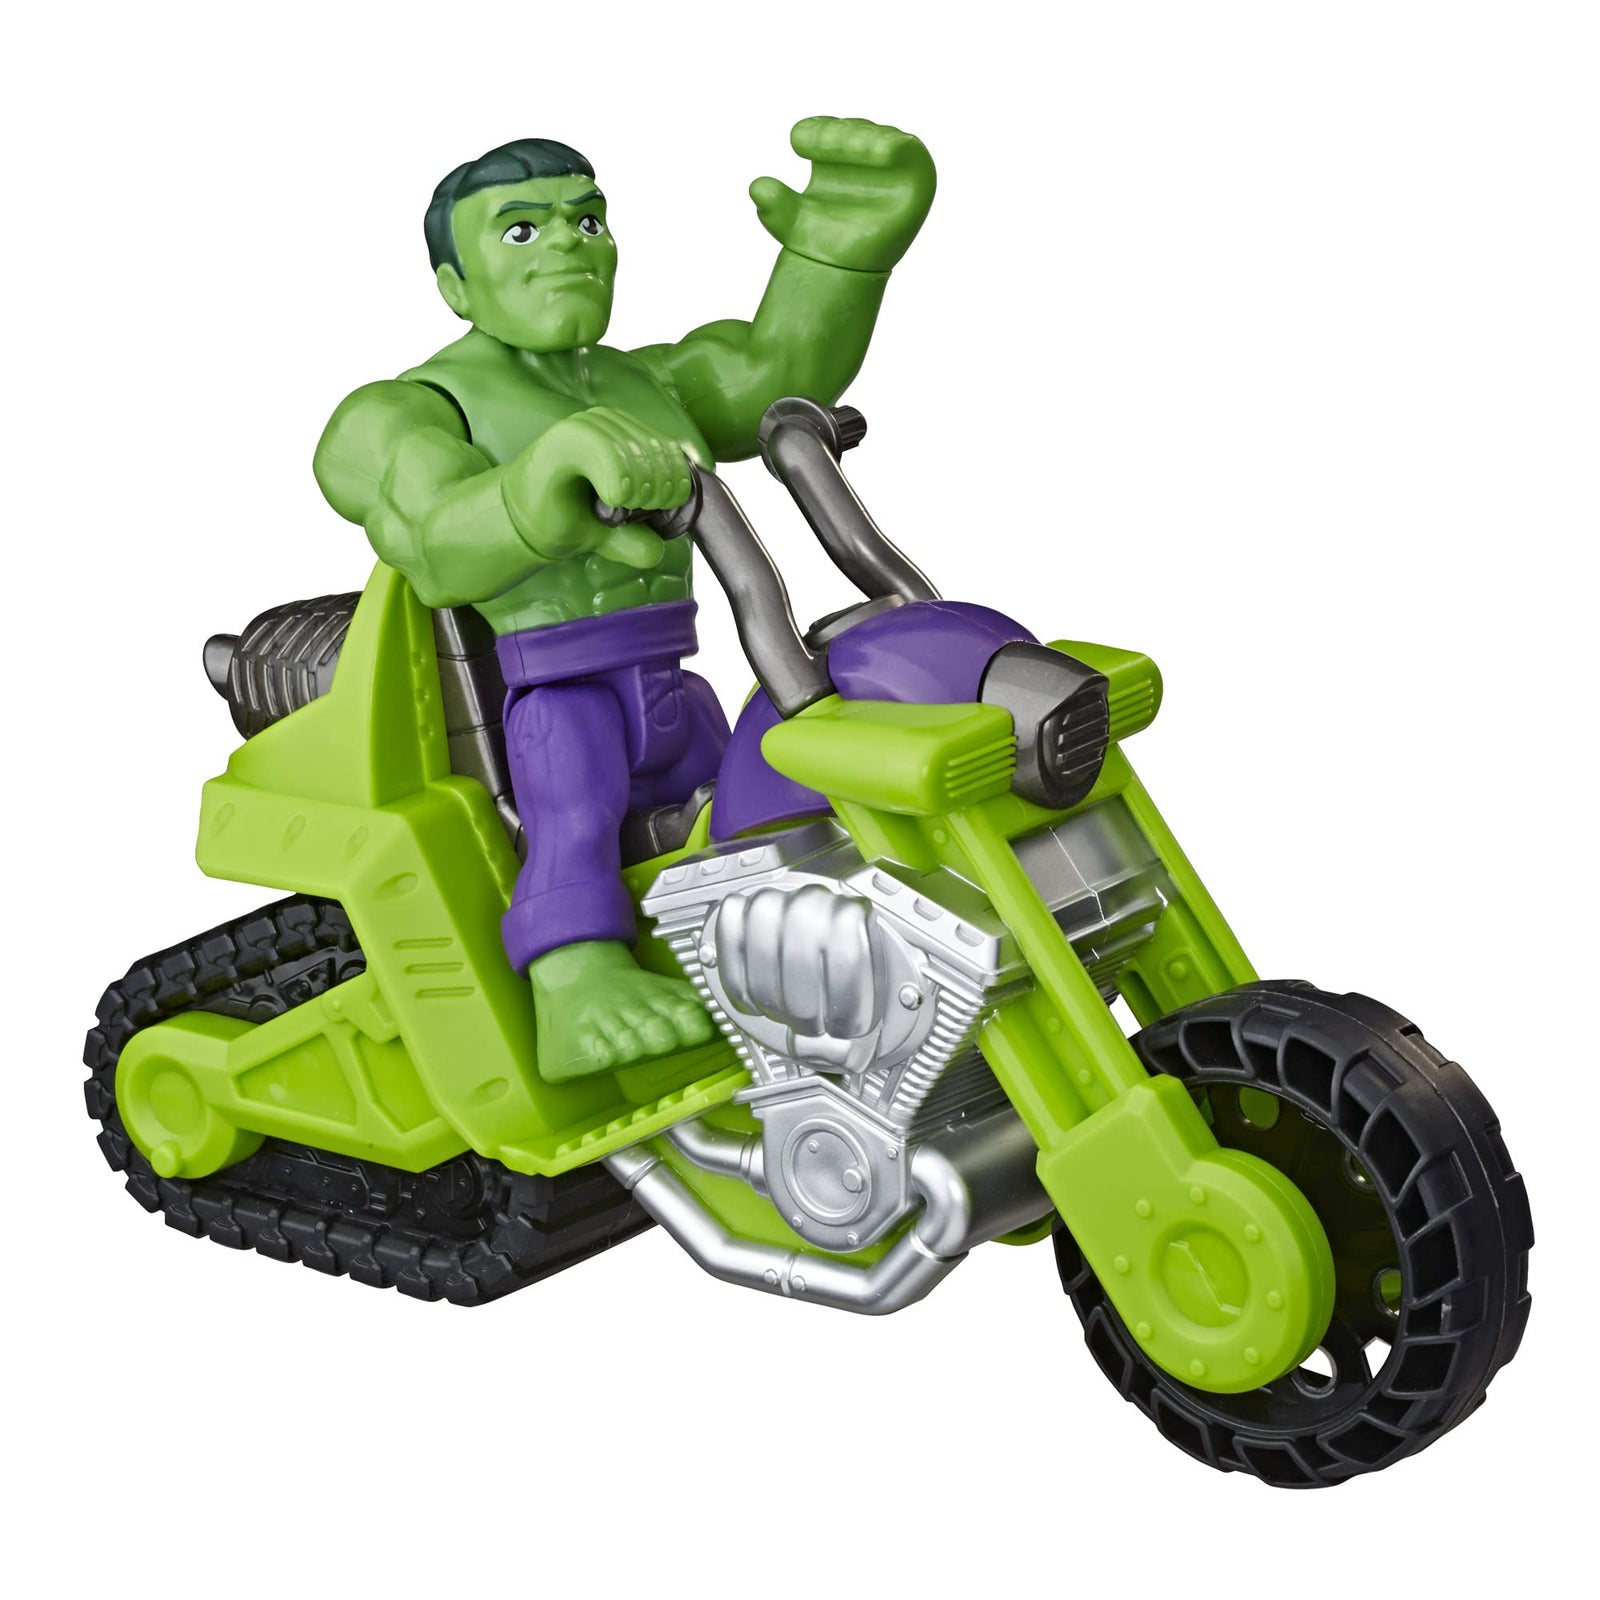 Super Hero Adventures Playskool Heroes Marvel Hulk Smash Tank, 5-Inch Figure and Motorcycle Set, Toys for Kids Ages 3 and Up